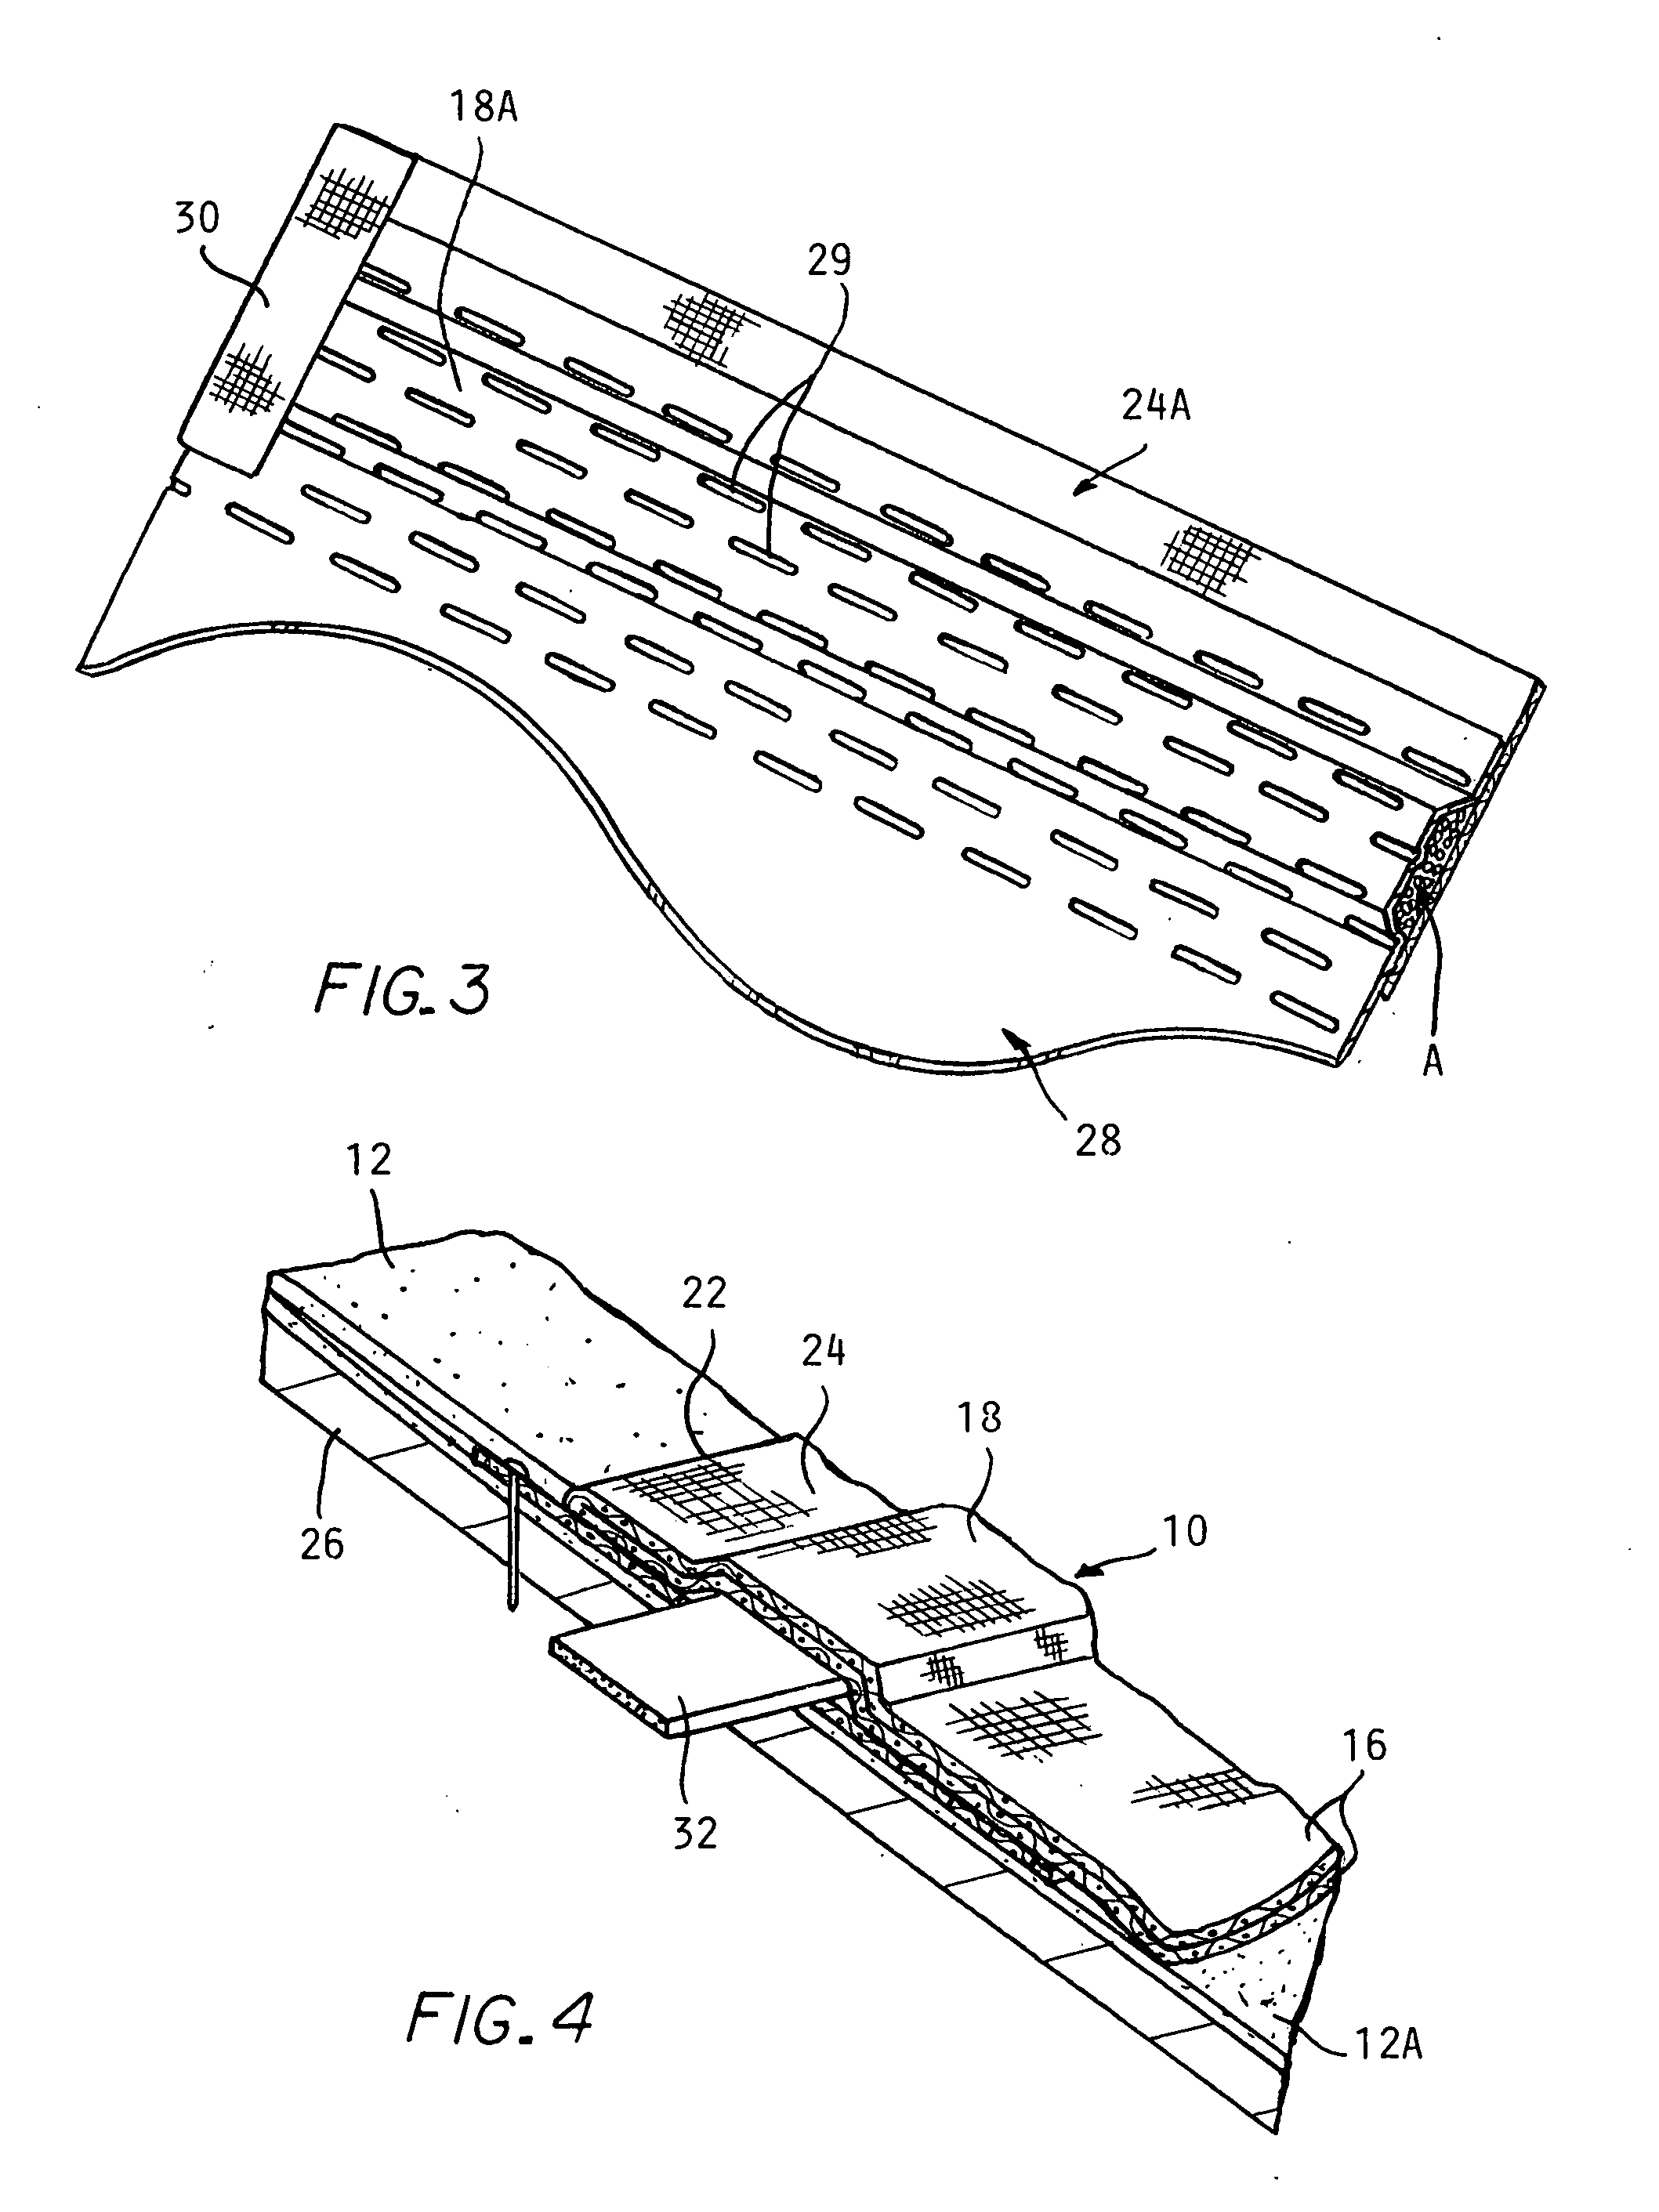 Shingle Insert Strips And Method For Eliminating and Prevent Growth of Algae, Moss, or Lichens on a Roof